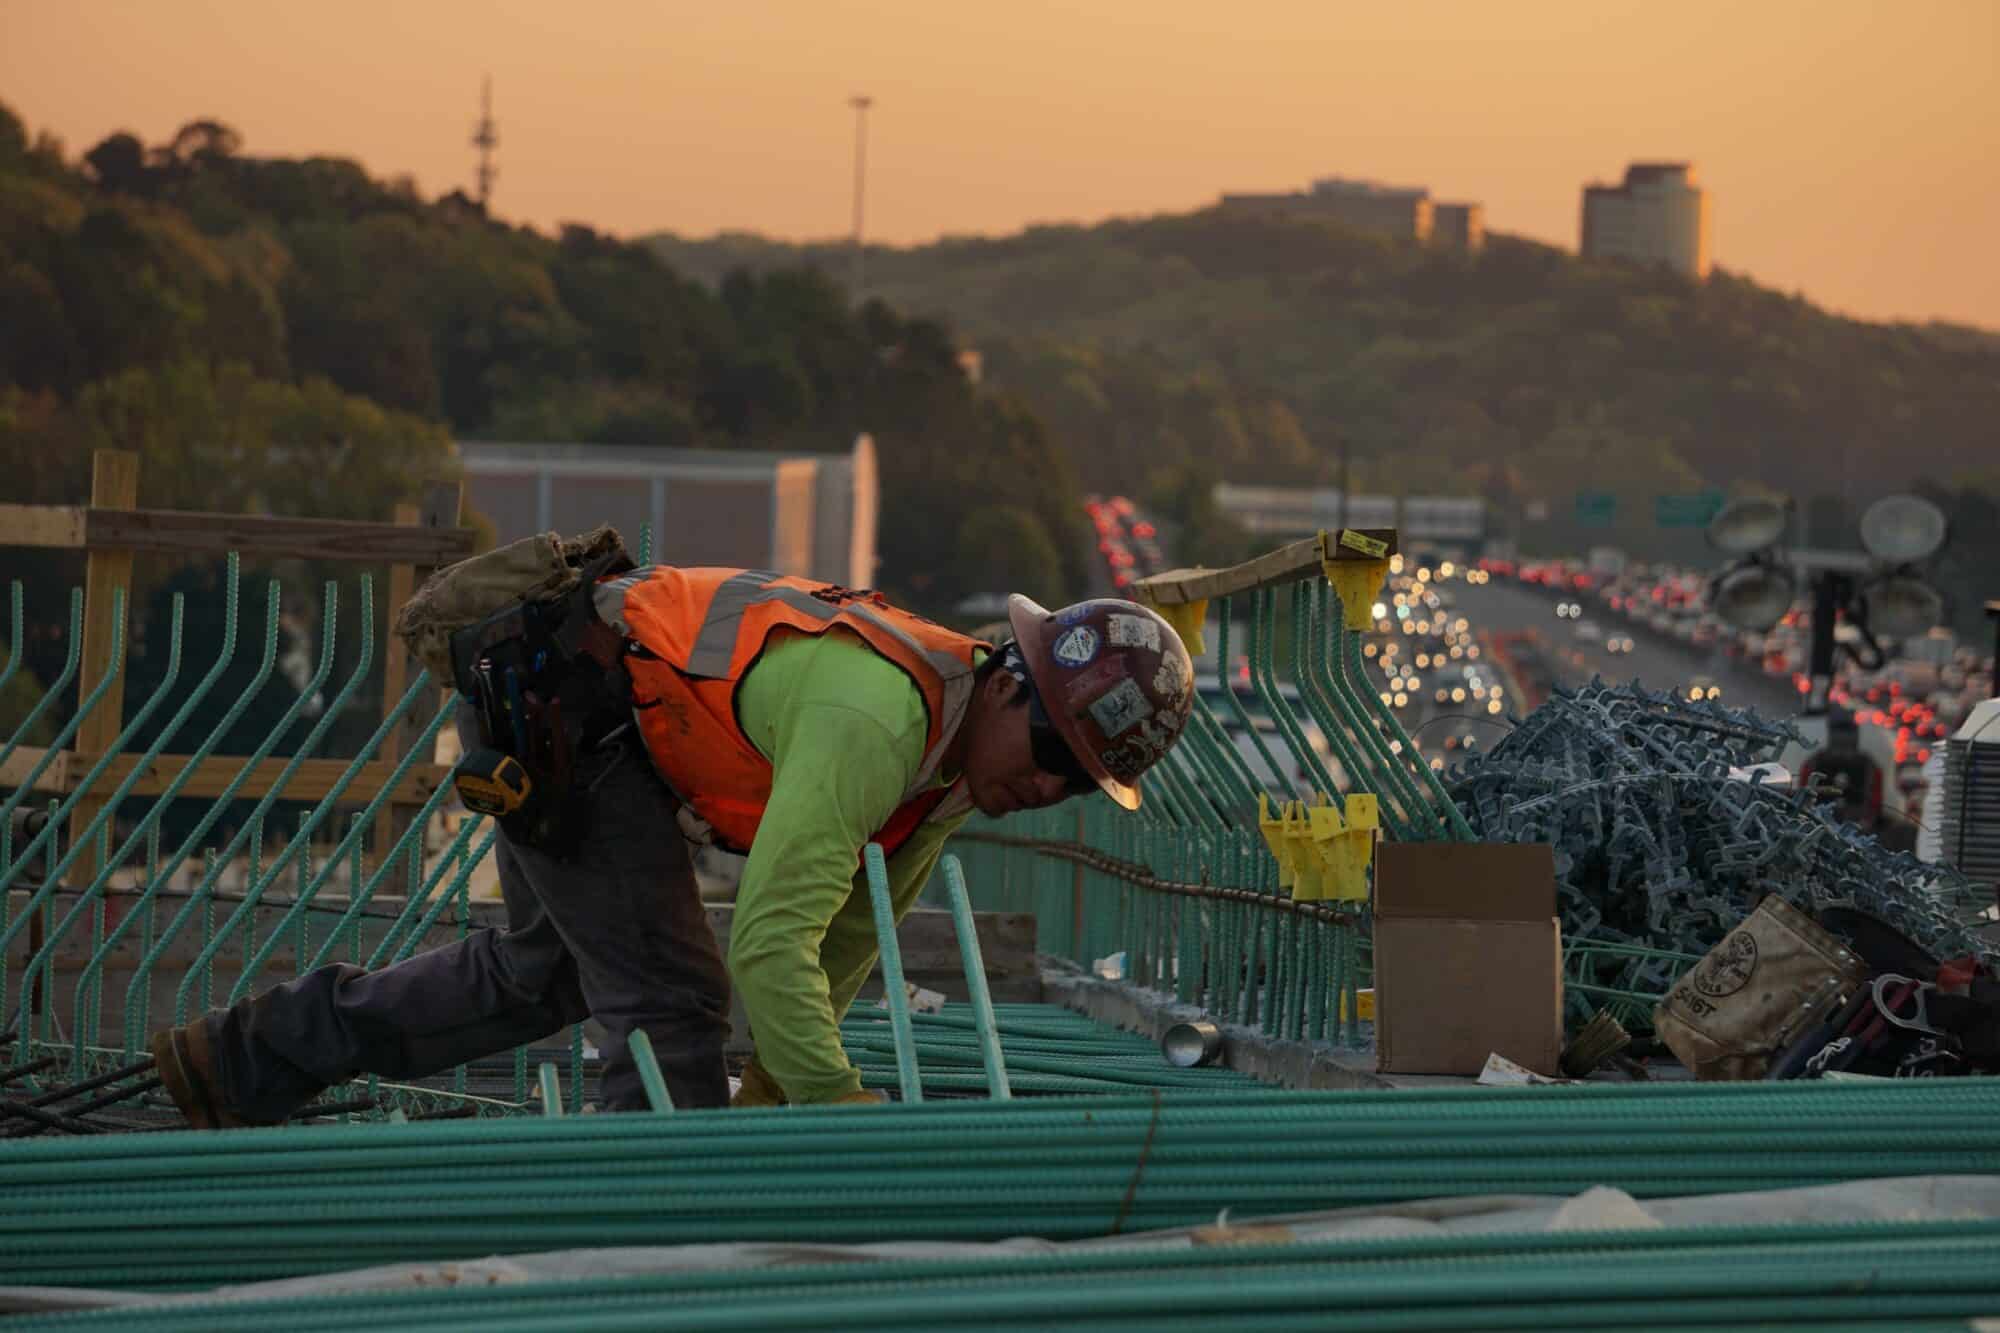 A construction worker builds infrastructure over a gridlocked highway.